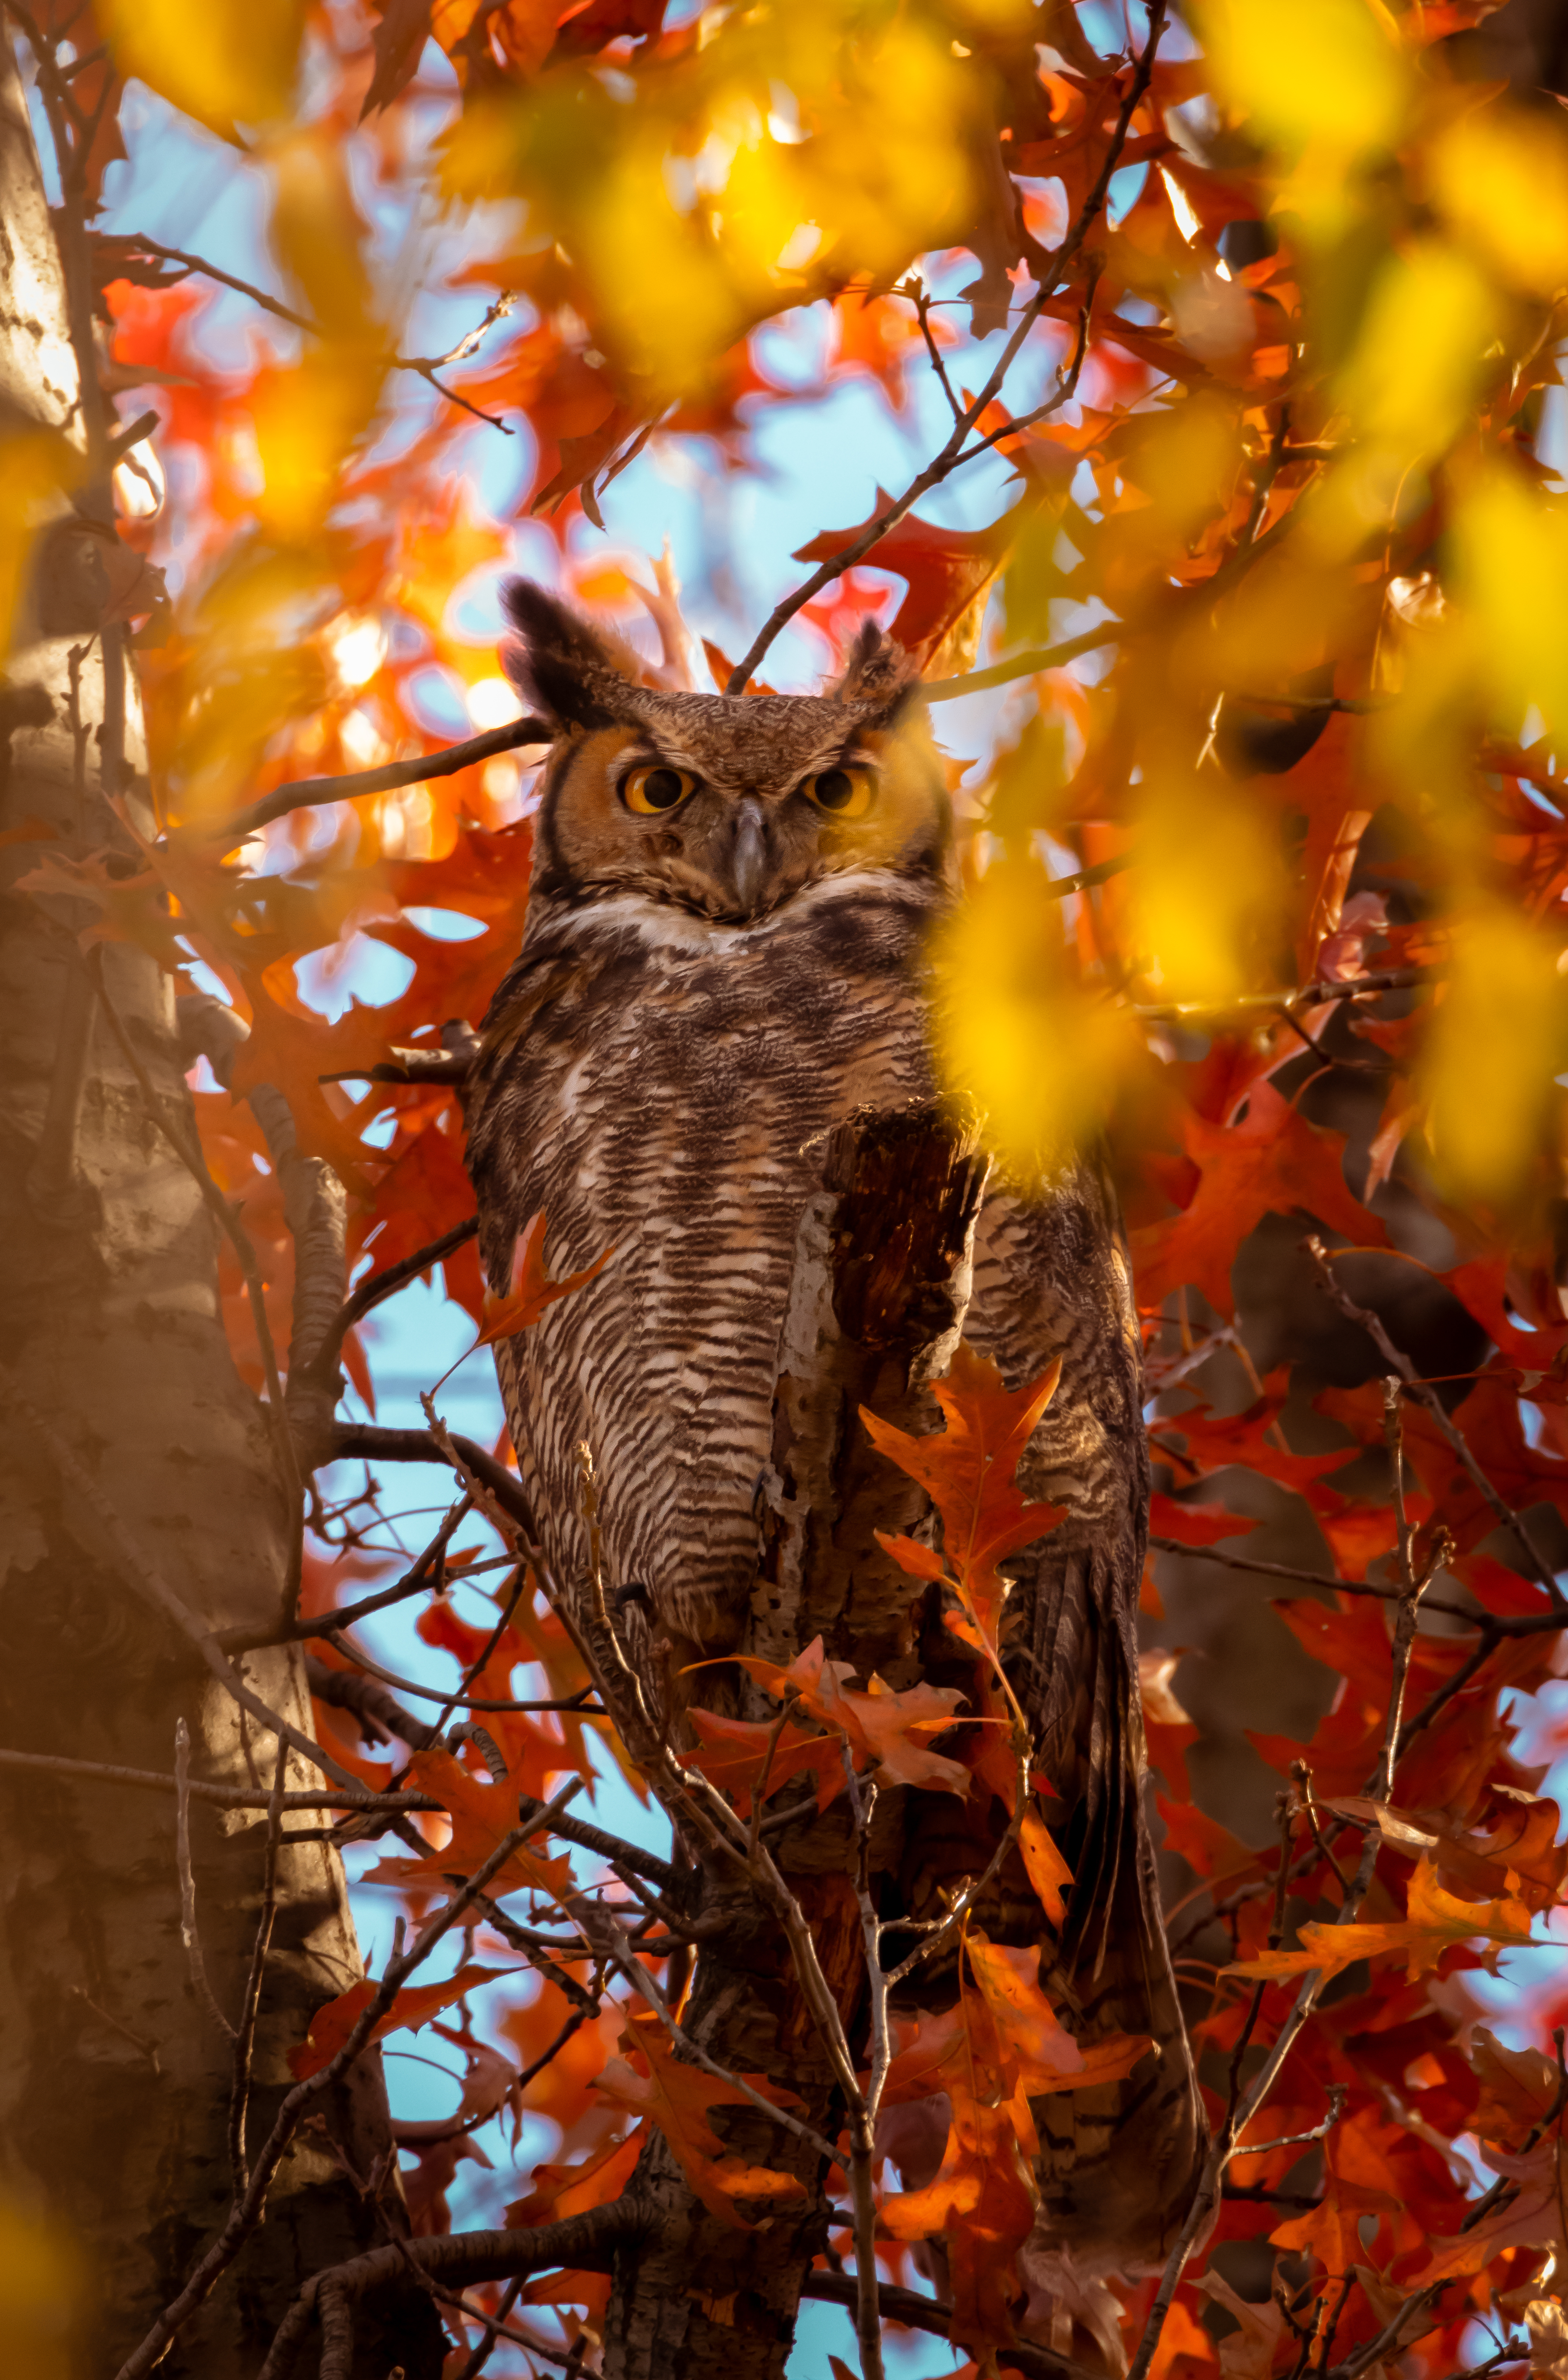 A great-horned owl blends in among fall foliage, looking down from up in a tree.